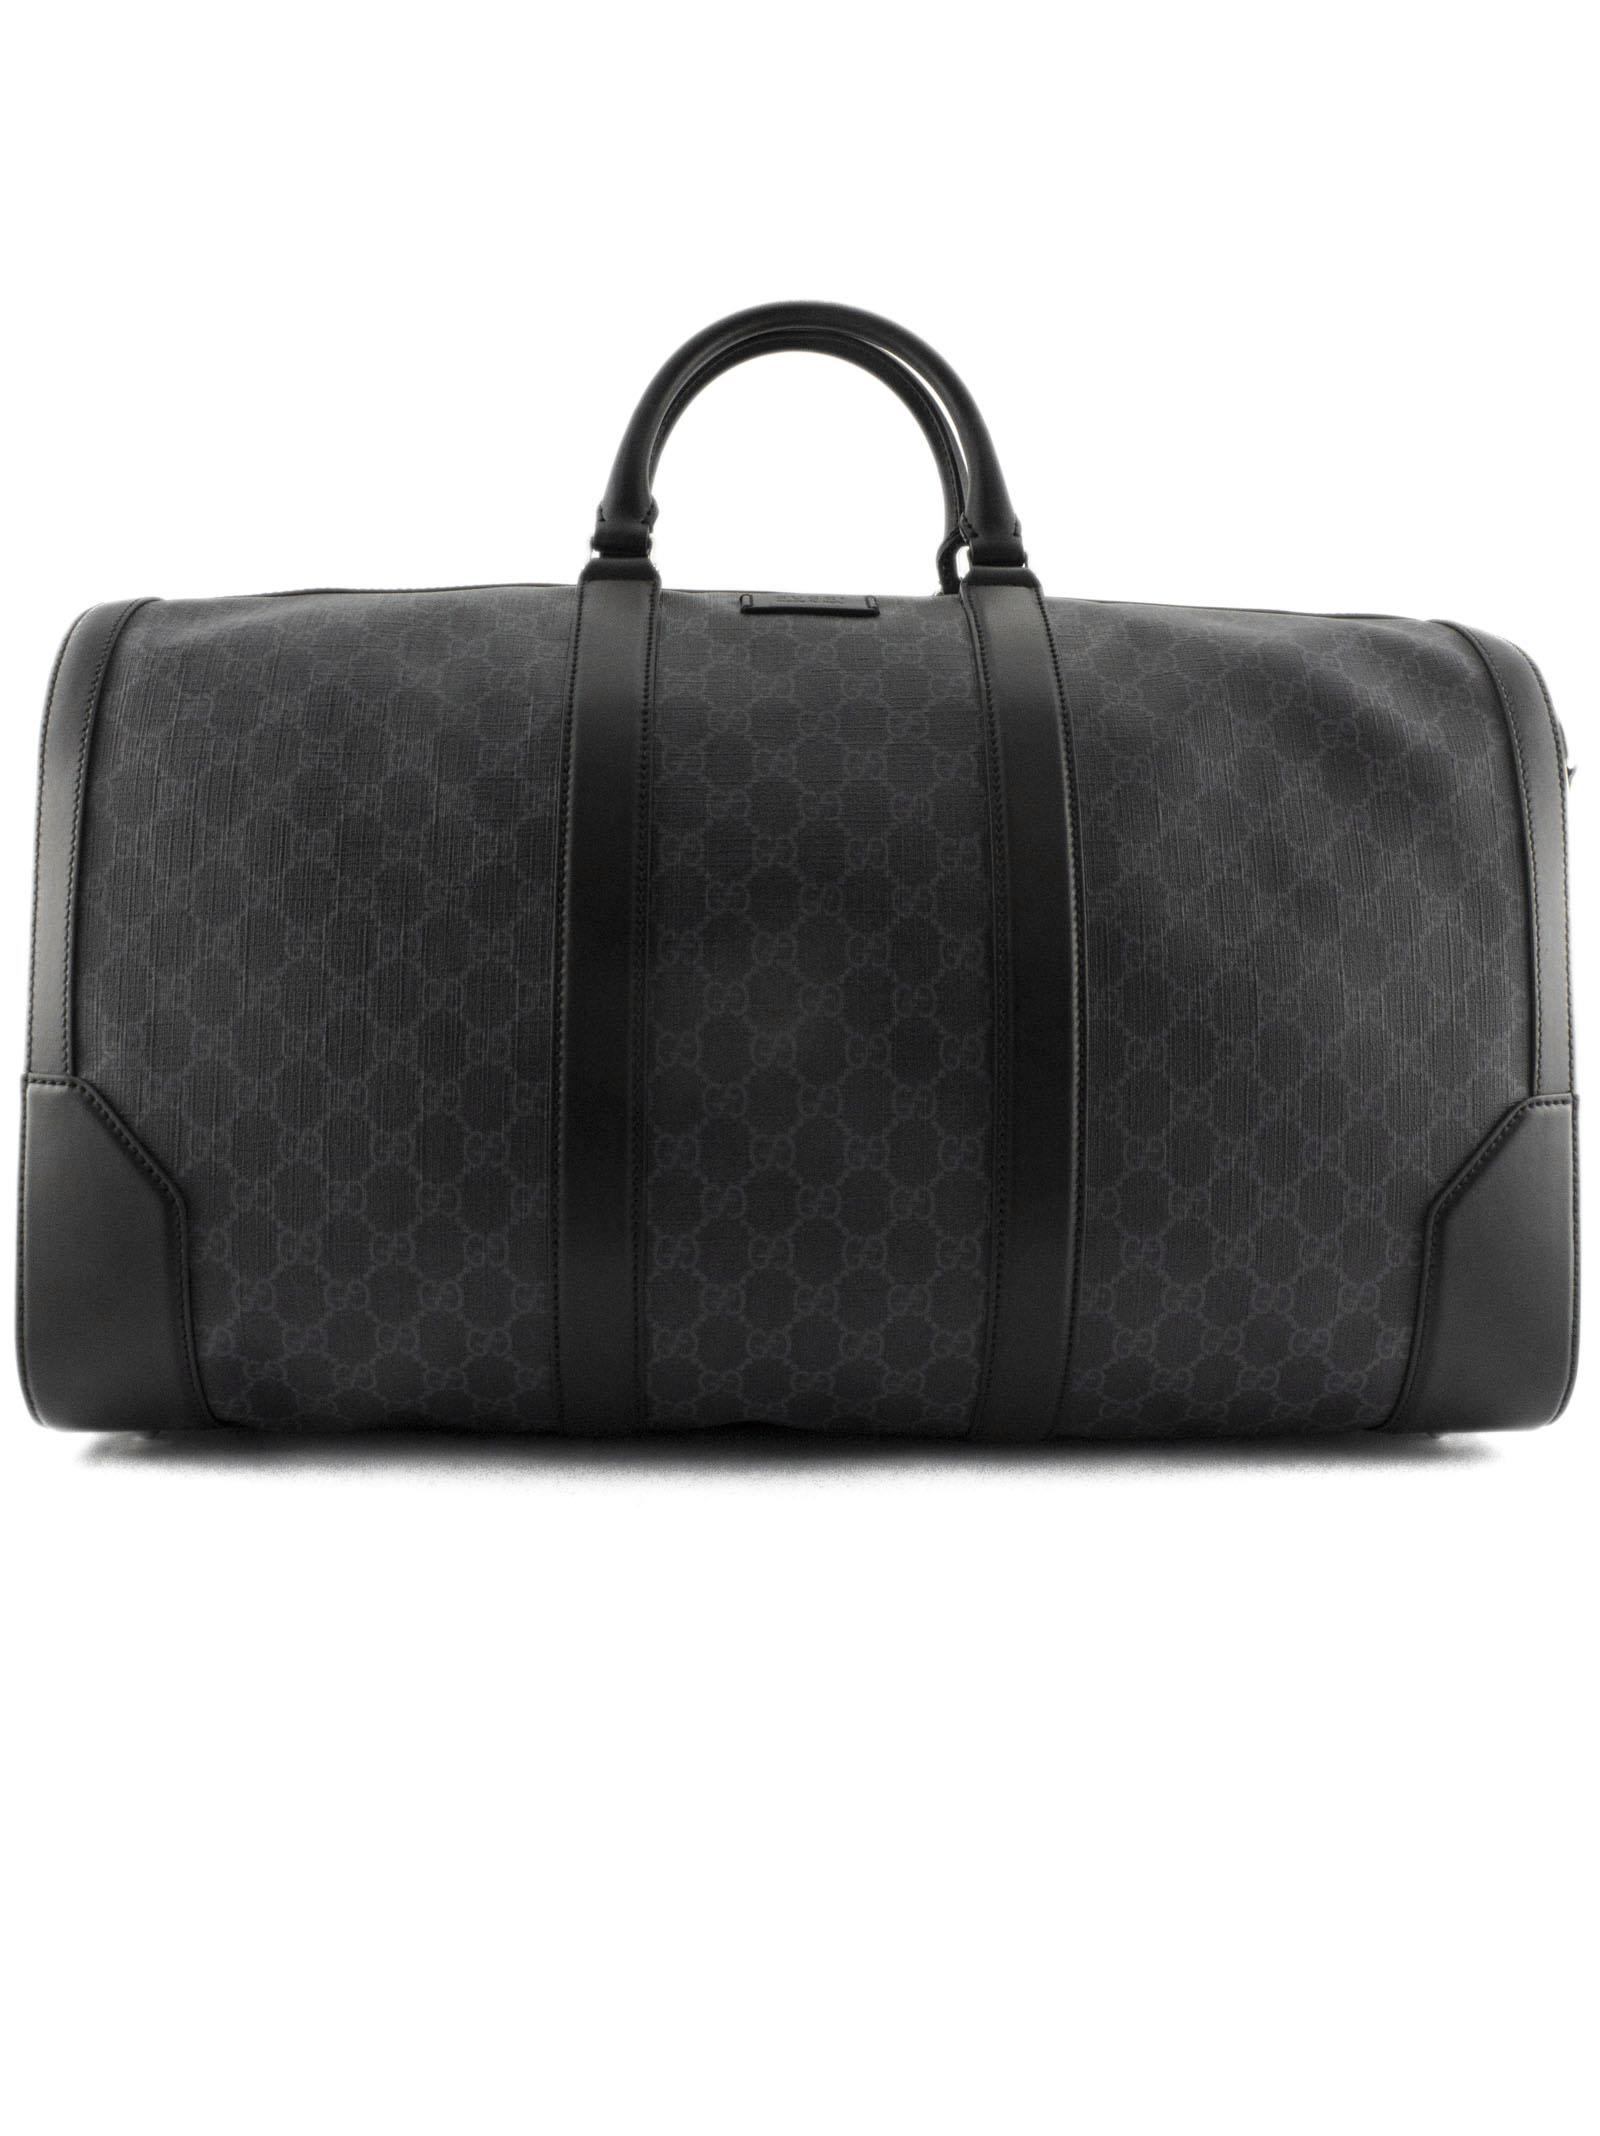 GUCCI BLACK/GREY SOFT GG SUPREME CARRY-ON DUFFLE,11277772